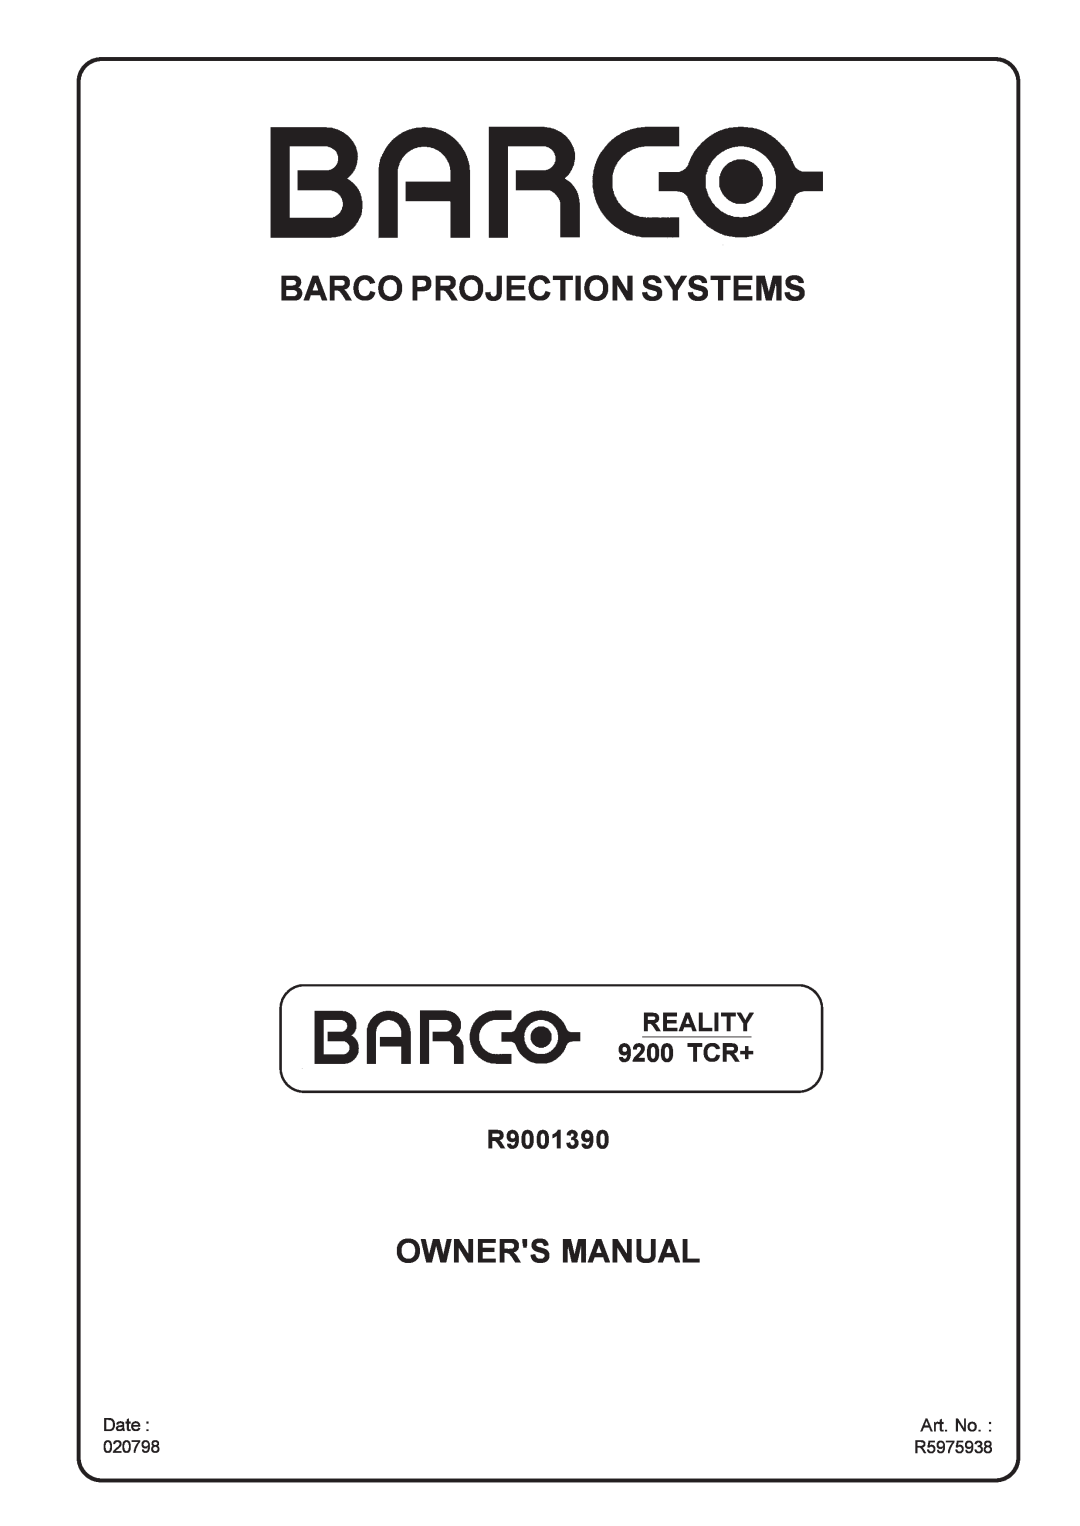 Barco manual Date, Art. No, 020798, R5975938, Barco Projection Systems, Owners Manual, REALITY 9200 TCR+ R9001390 